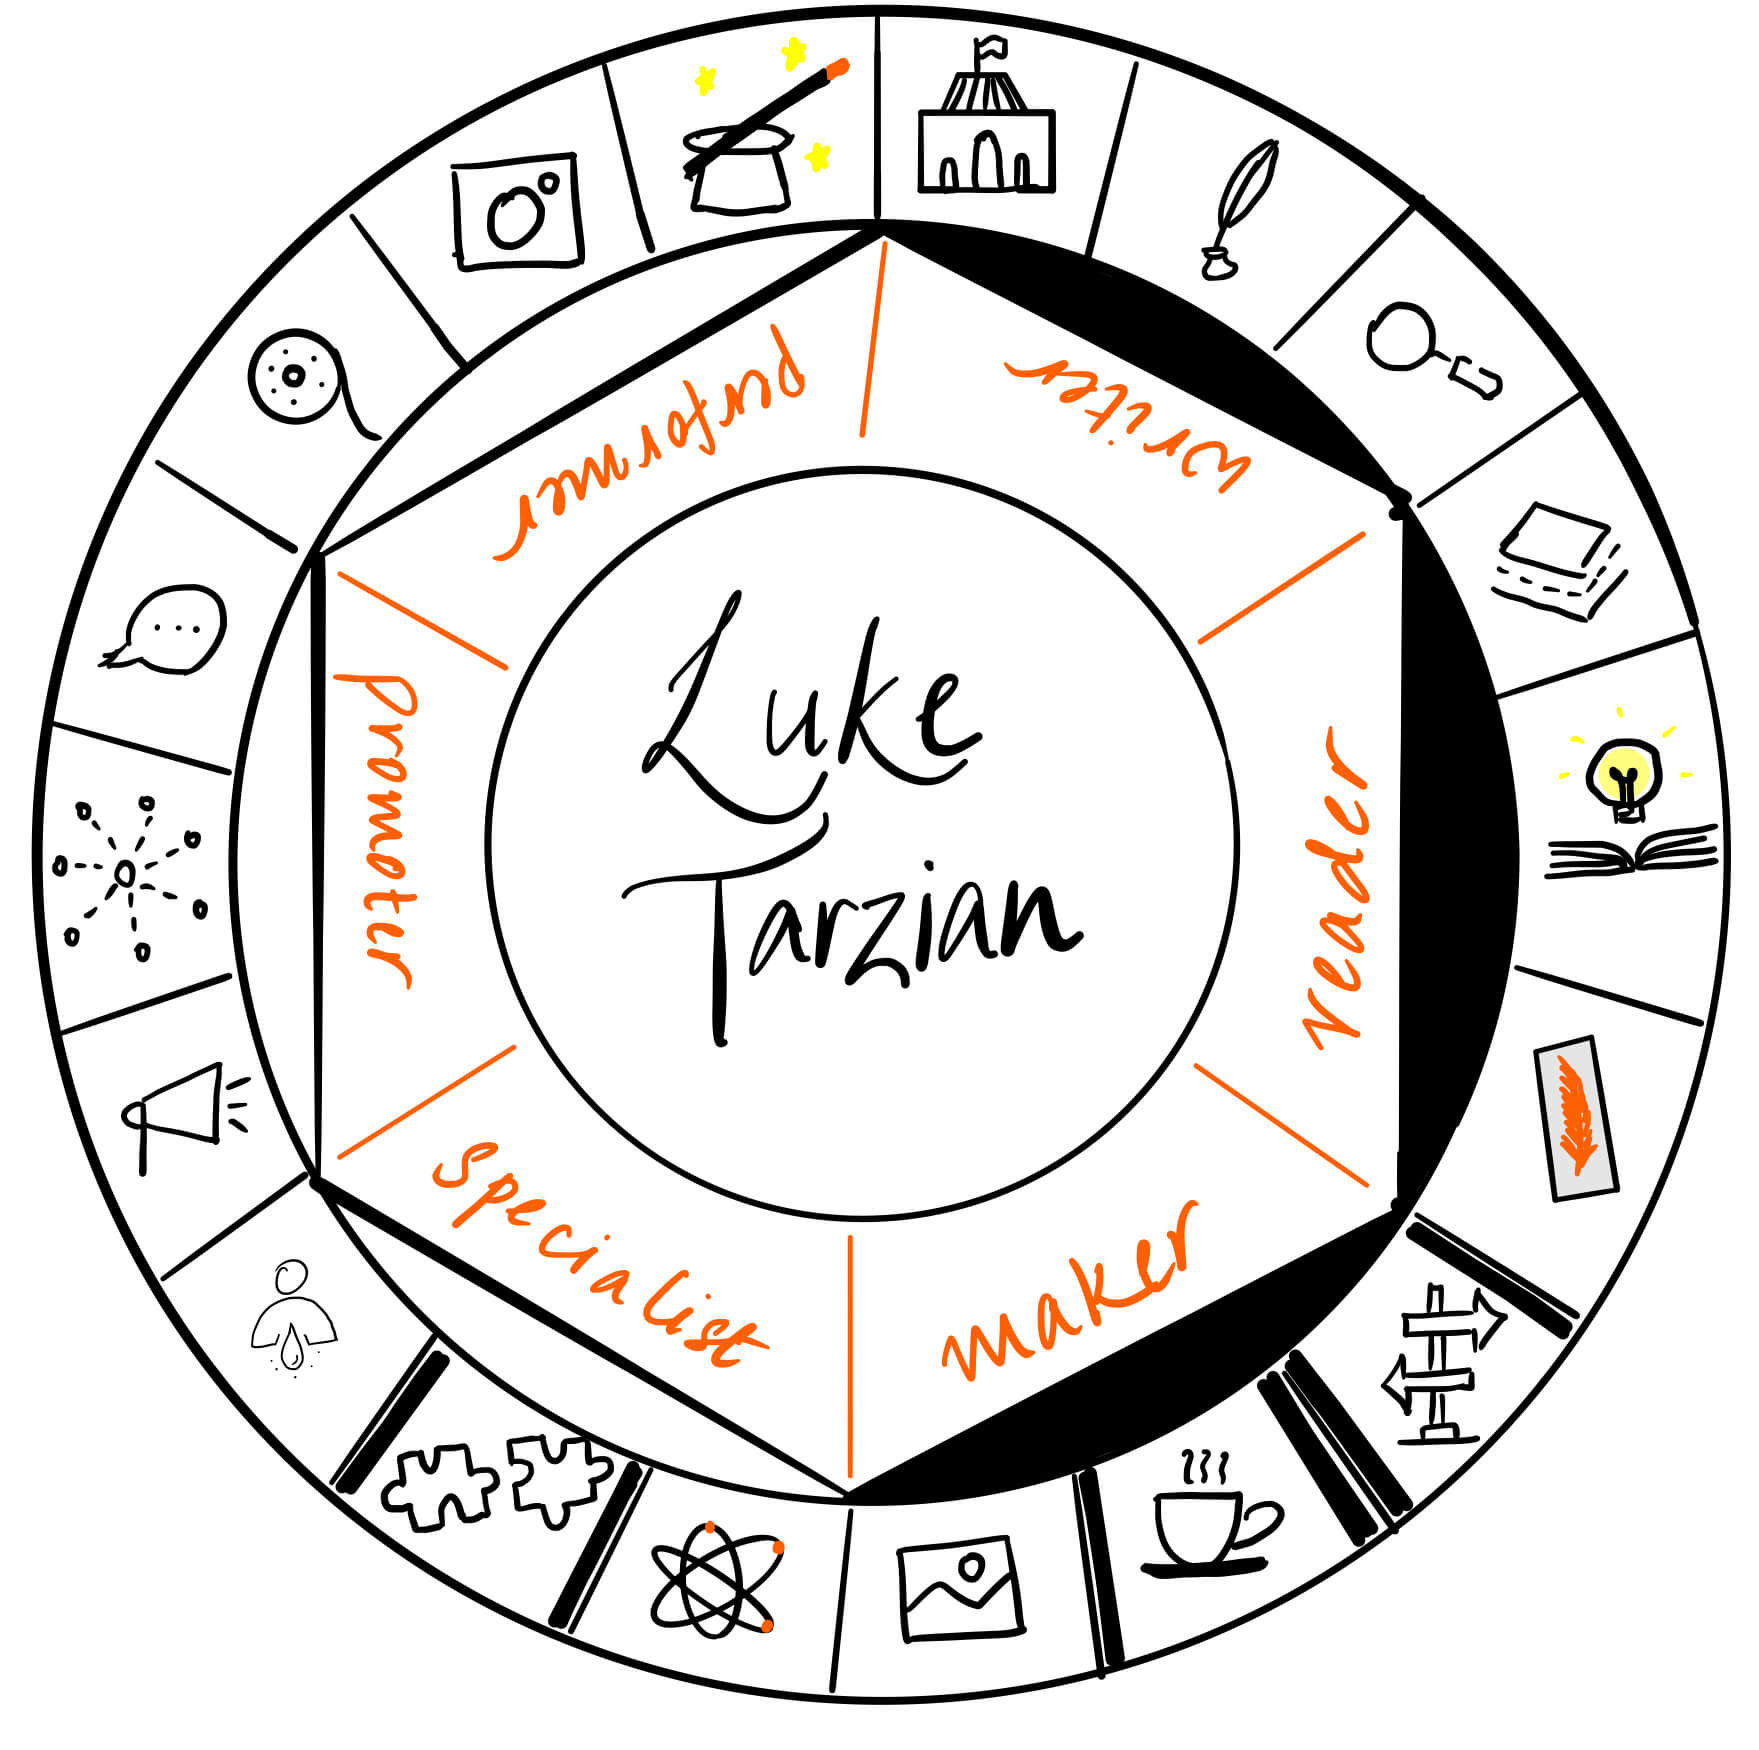 Luke Tarzian is a writer, reader and maker. It's a pleasure to have him over on The Creator's Roulette to talk about book design.